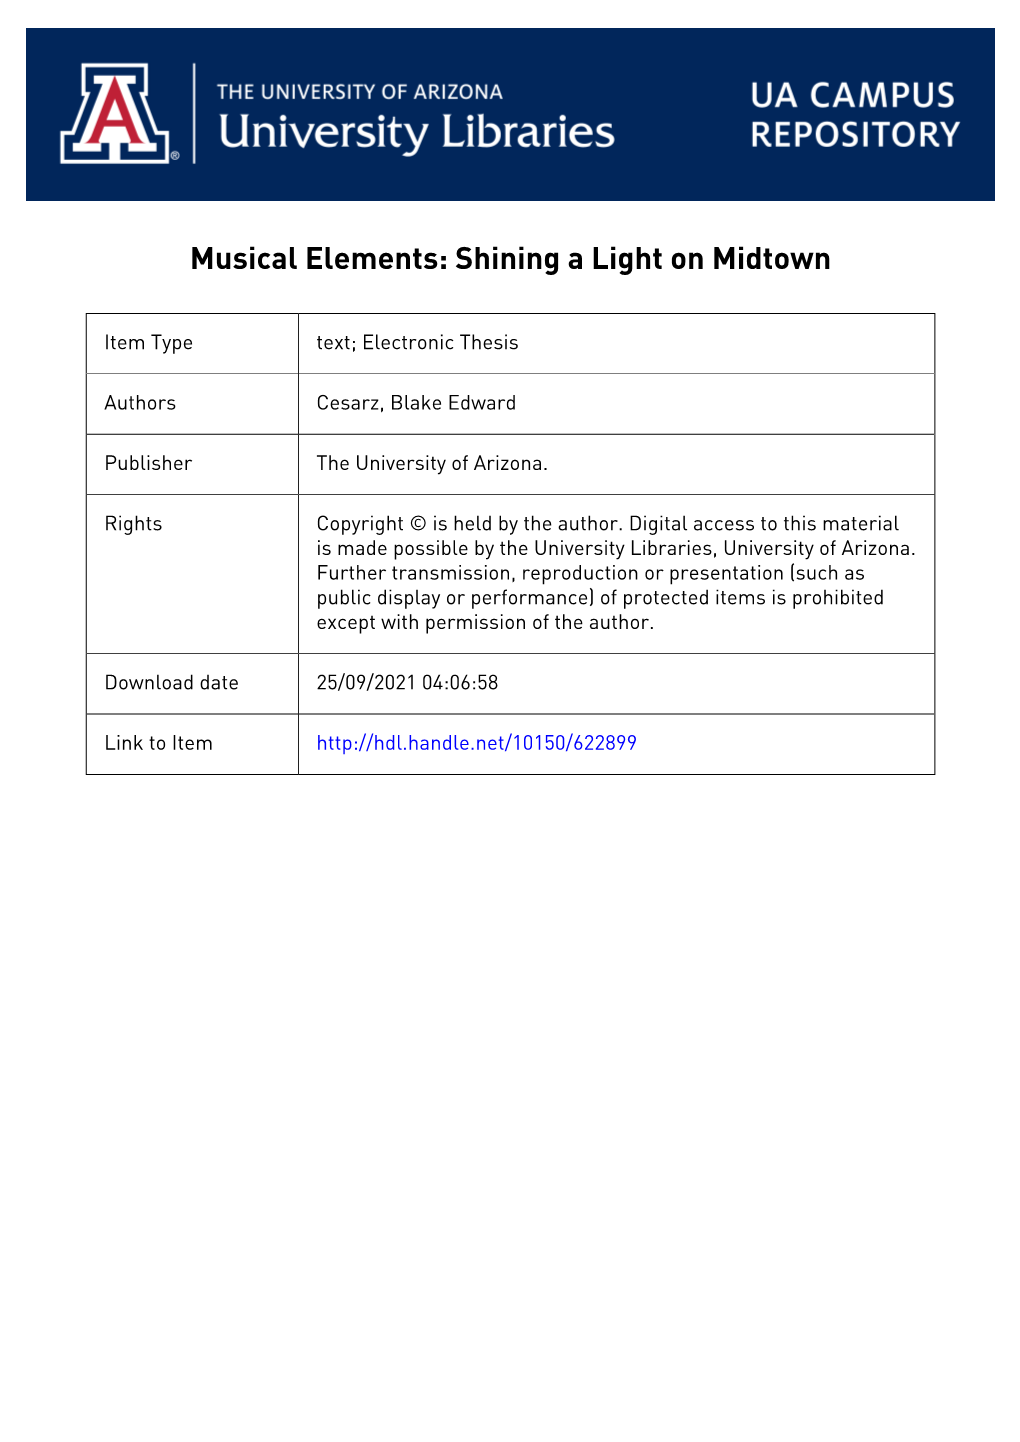 Musical Elements: Shining a Light on Midtown